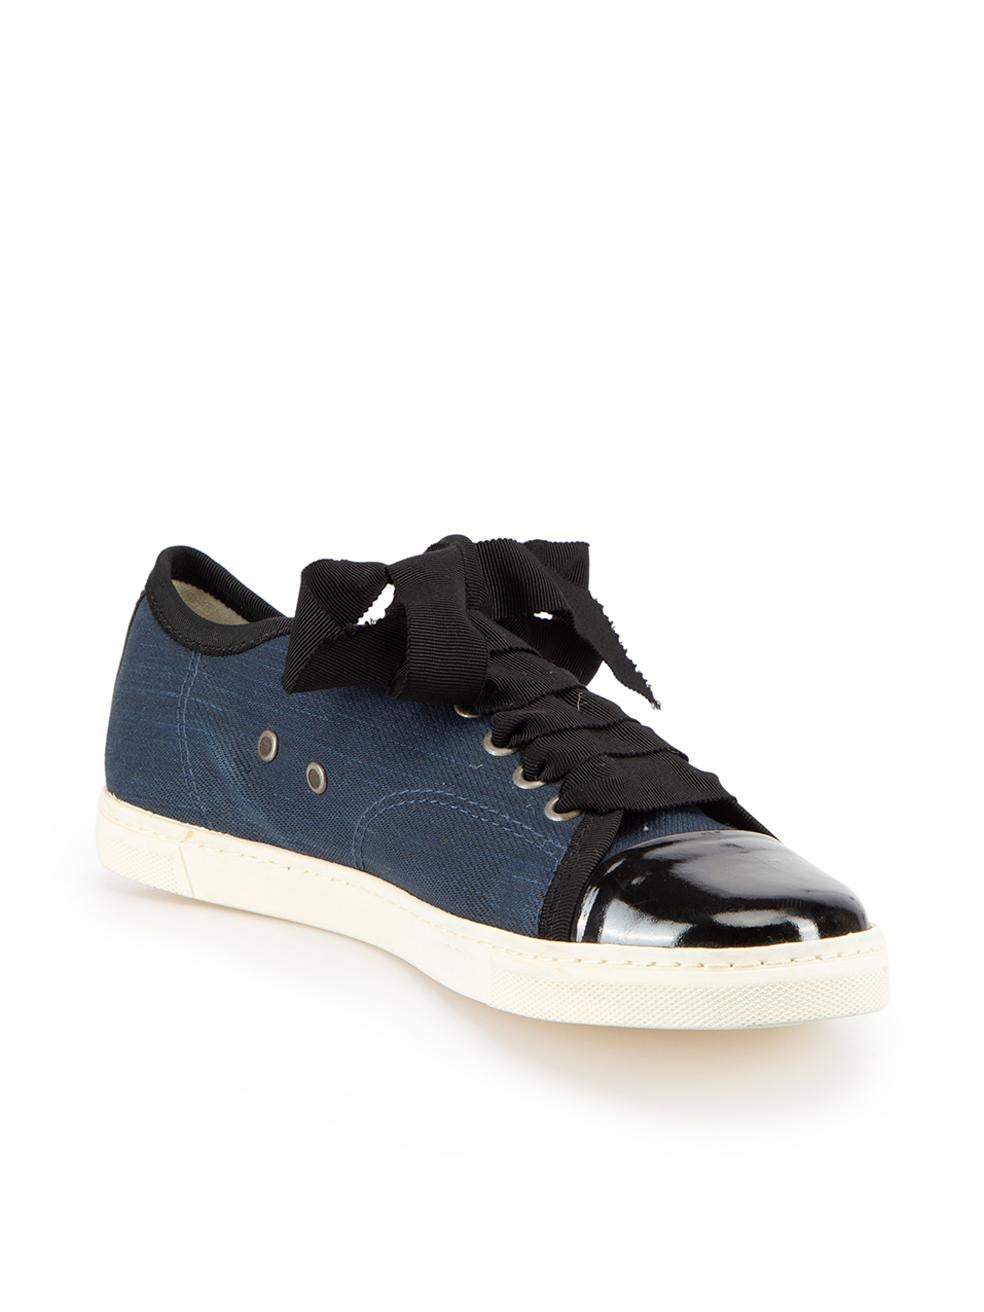 CONDITION is Very Good. Minimal wear to shoes is evident. Minimal wear and discolouration of rubber outsole as well as mild tarnishing of eyelets on this used Lanvin designer resale item.





Details


Navy & black

Cloth

Trainers

Flat